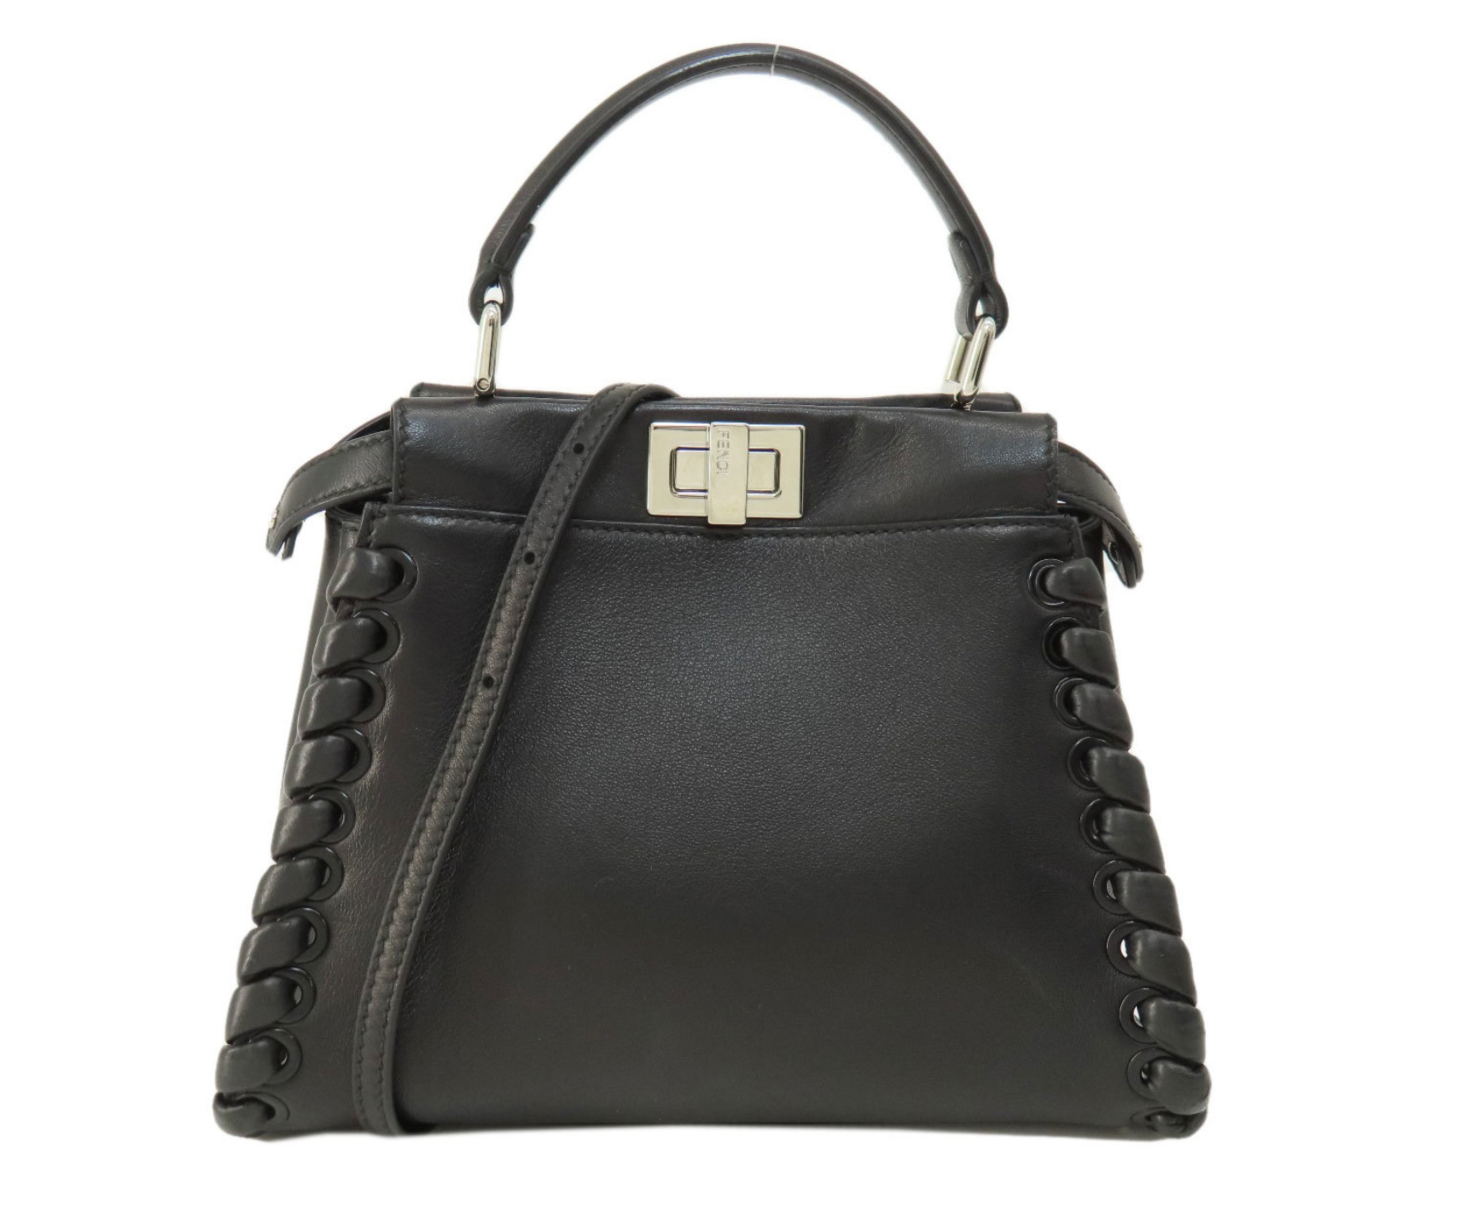 Pre owned Mini Whipstitched Peekaboo Fendi Black Leather handbag with a strap